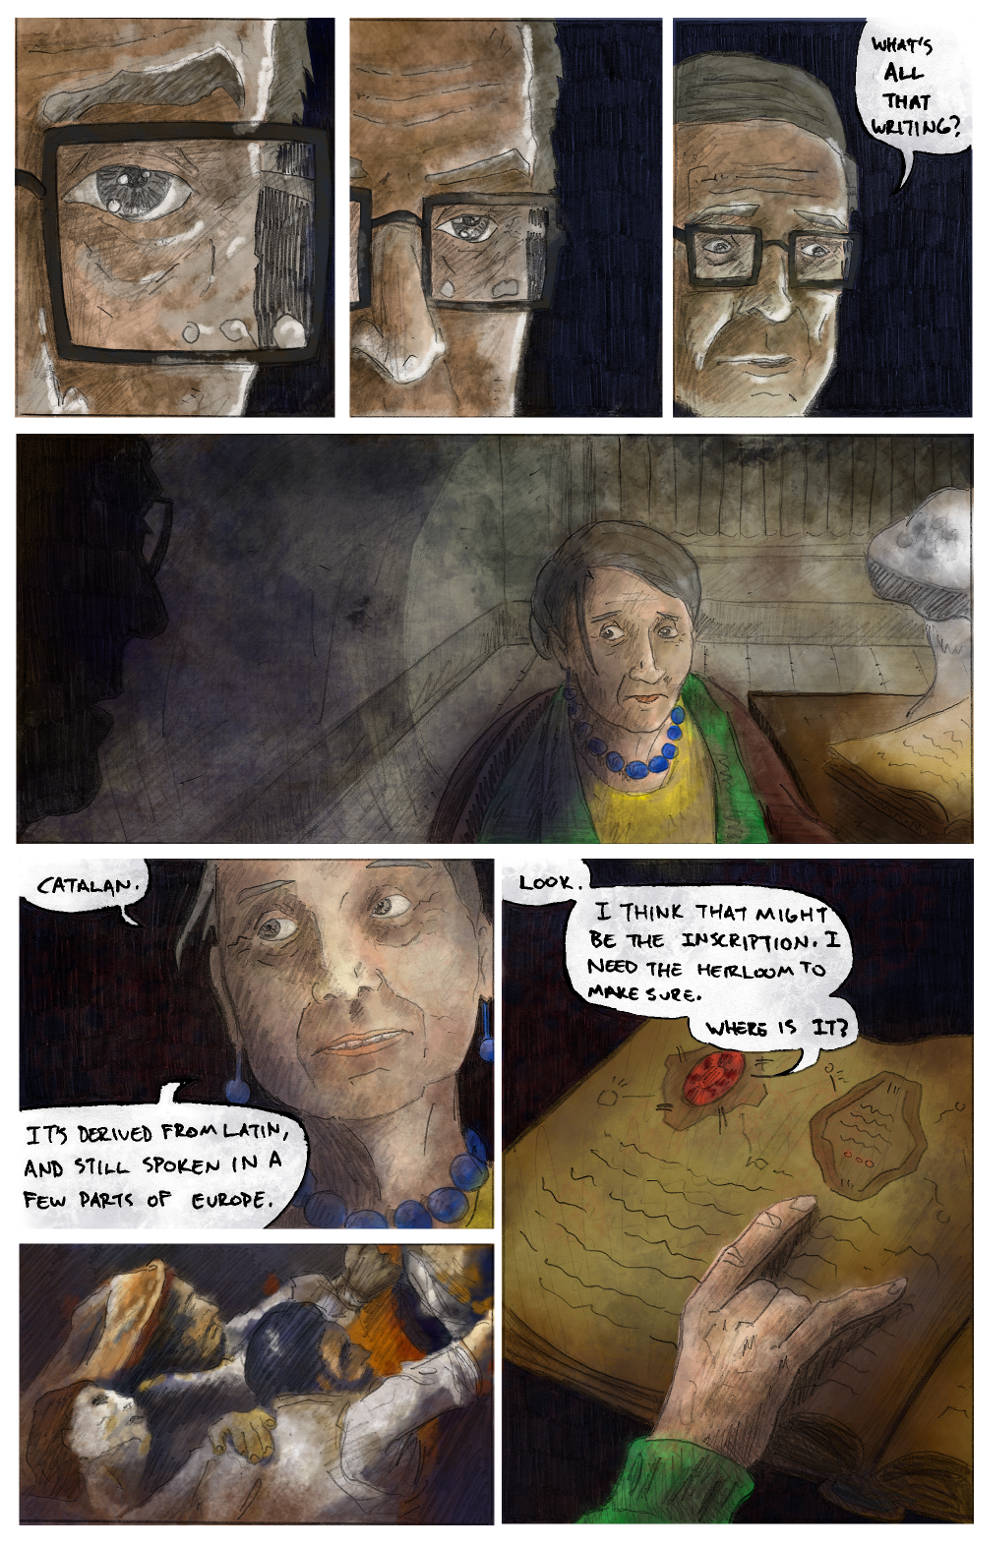 Page 23. Please enable images to read the comics :)